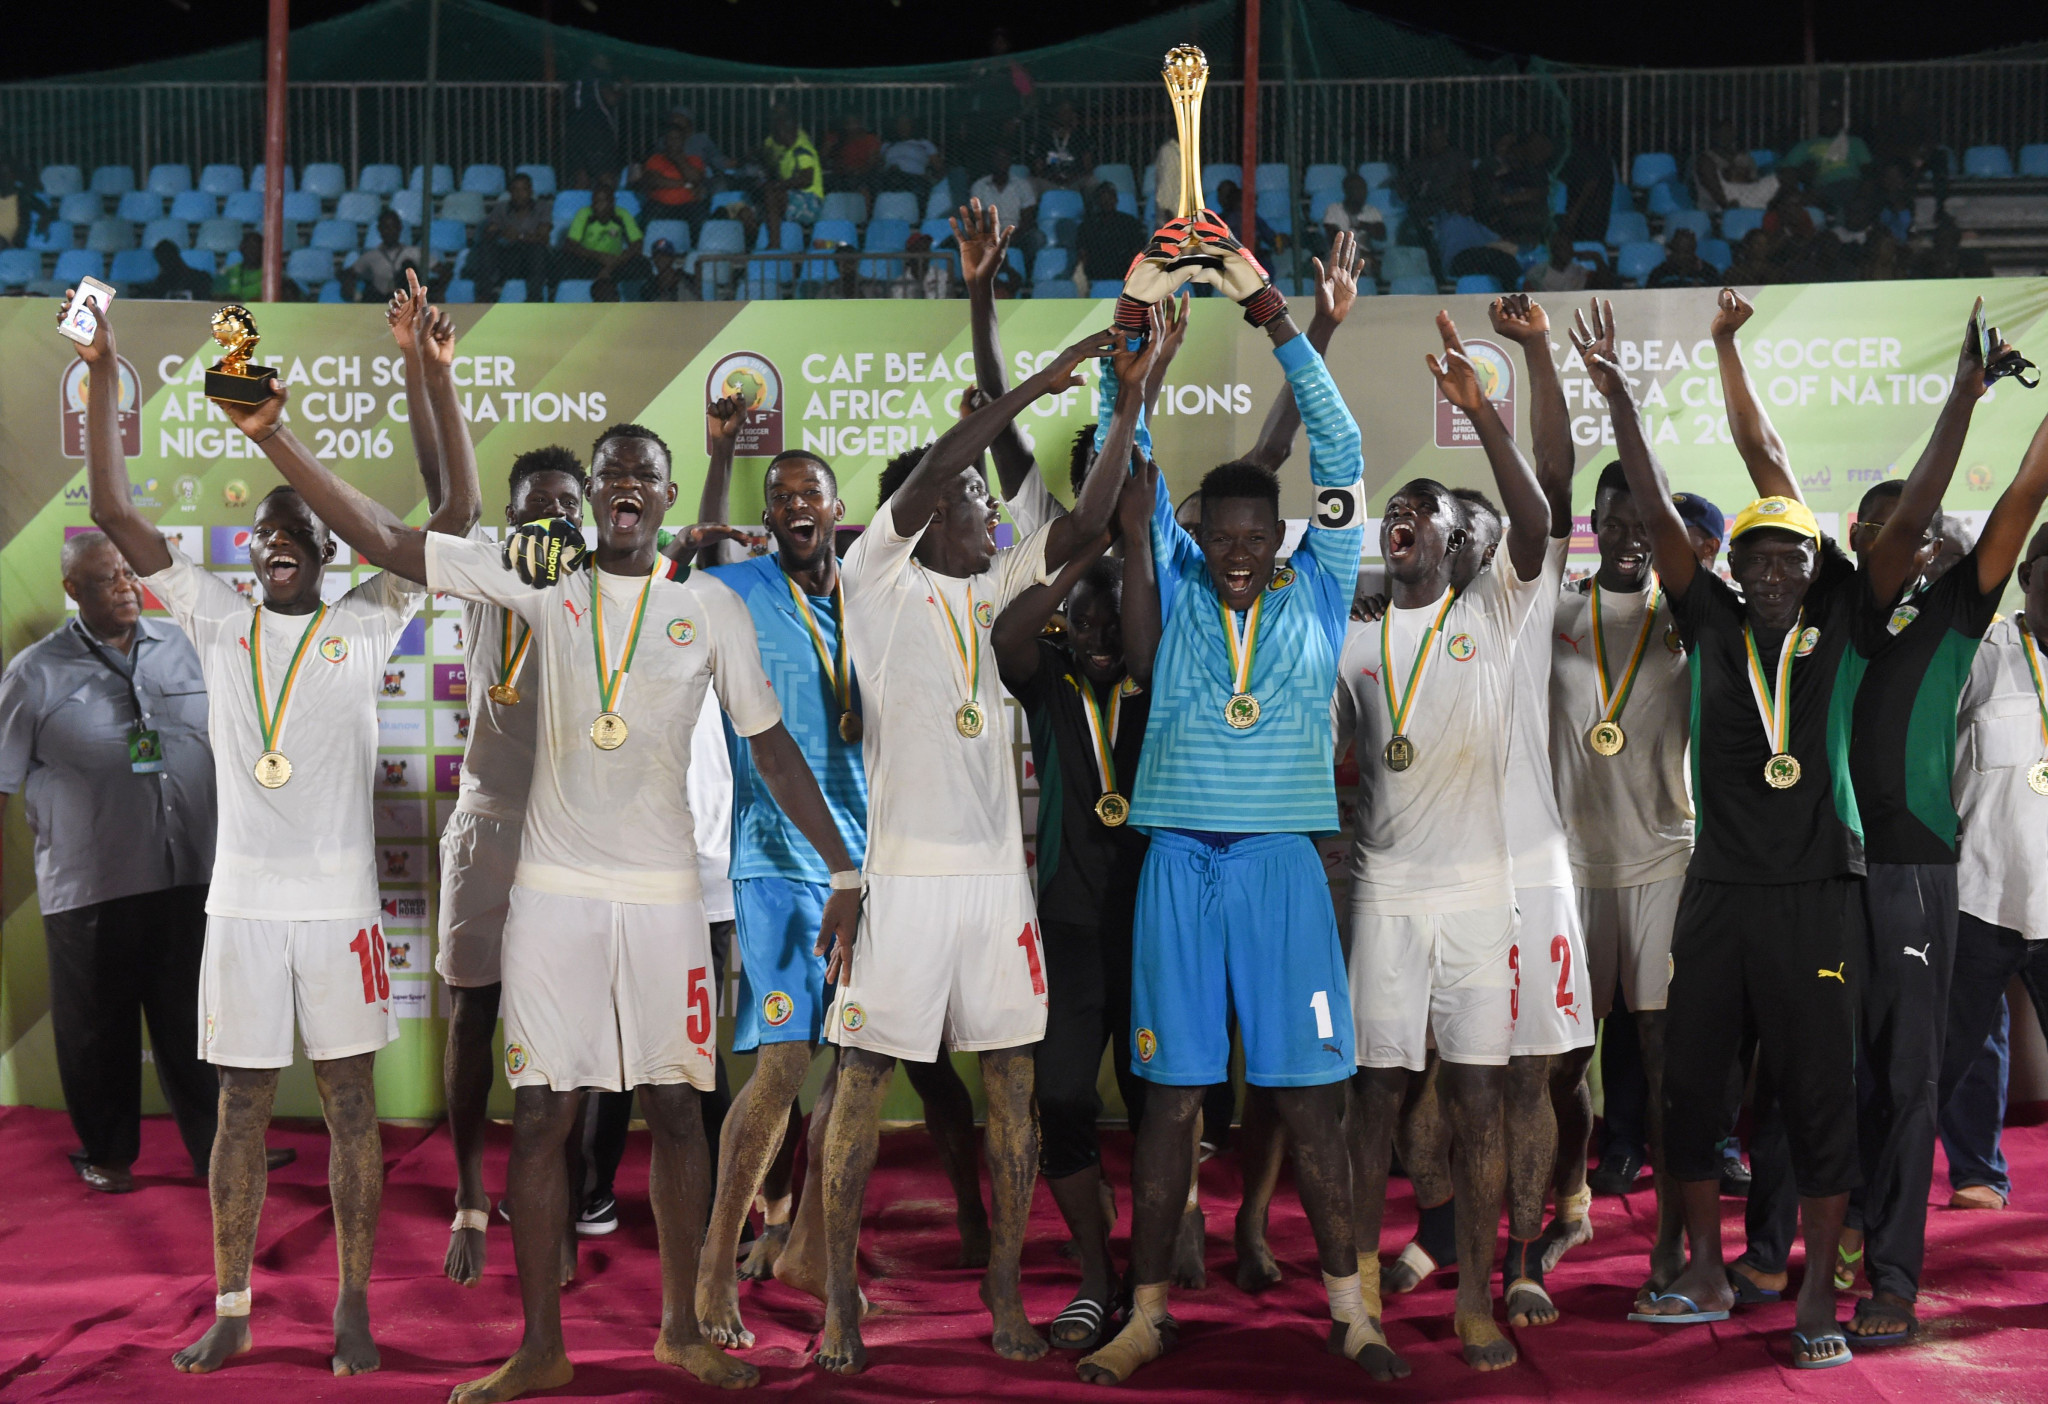 Senegal, seeking a third Beach Soccer Africa Cup of Nations title, reached the final today and will now play Mozambique ©Getty Images